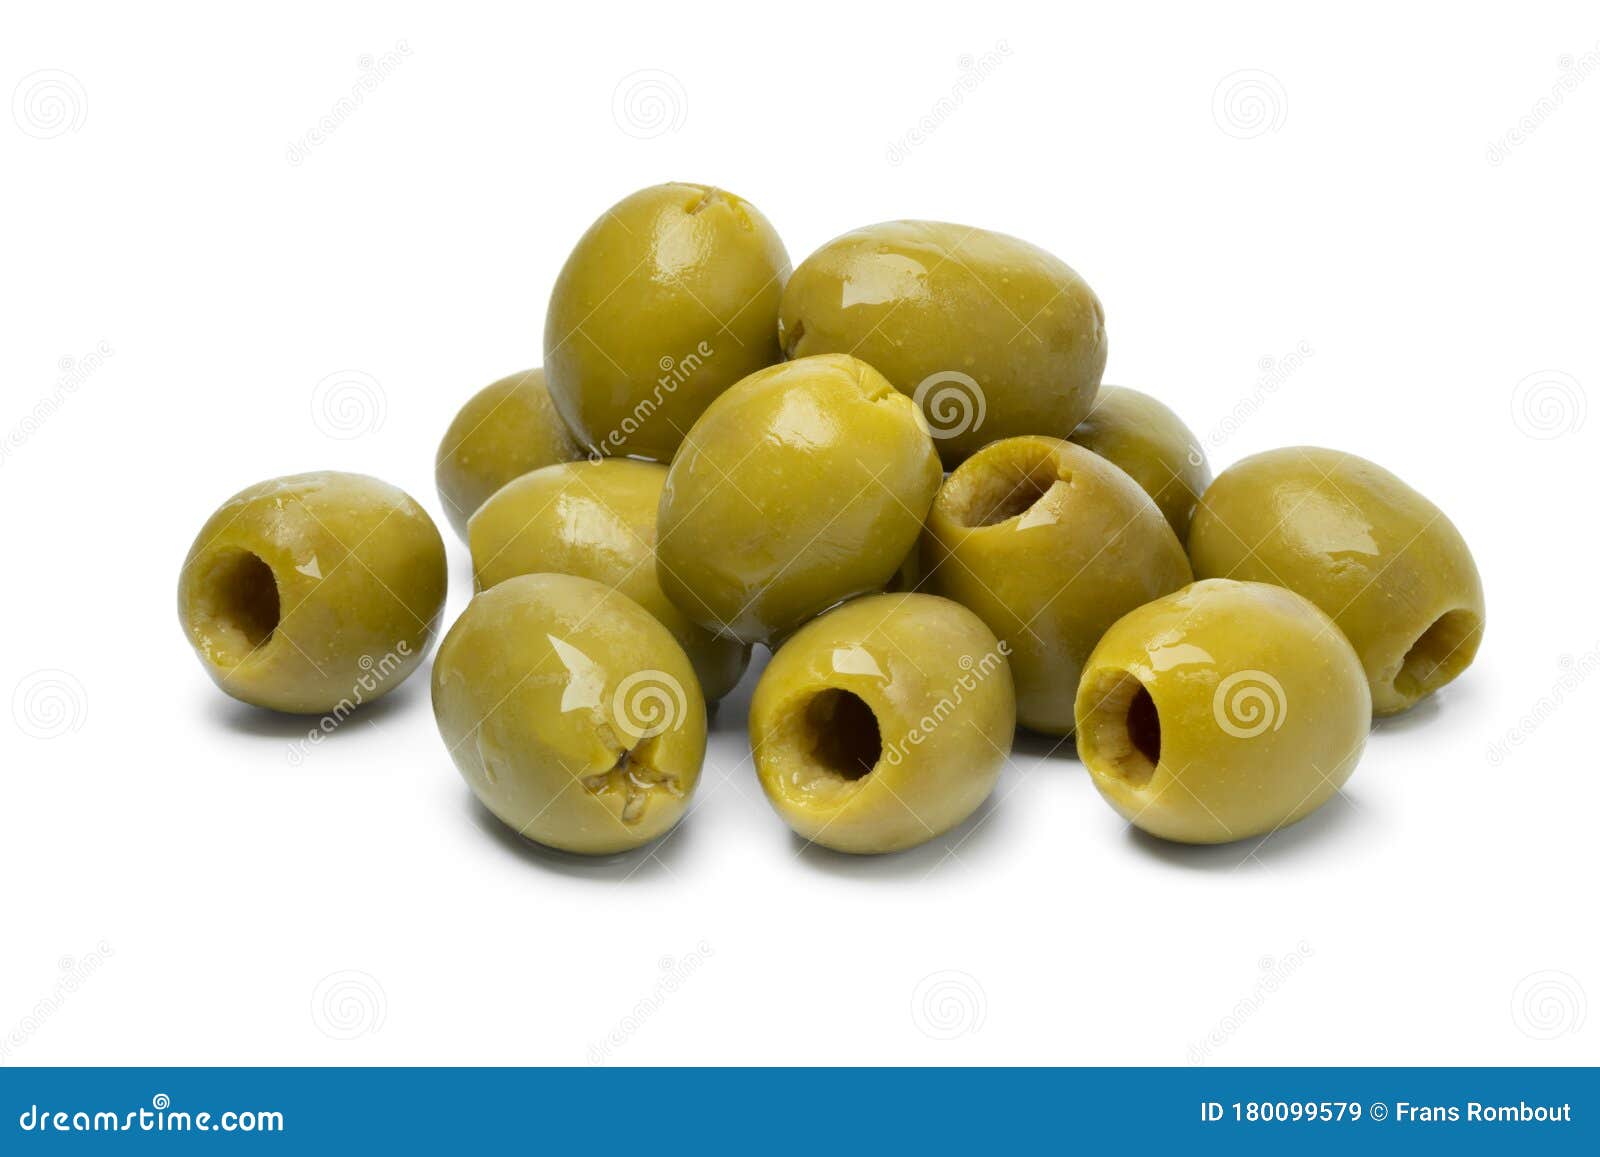 pitted green olives as an ingredient for cooking